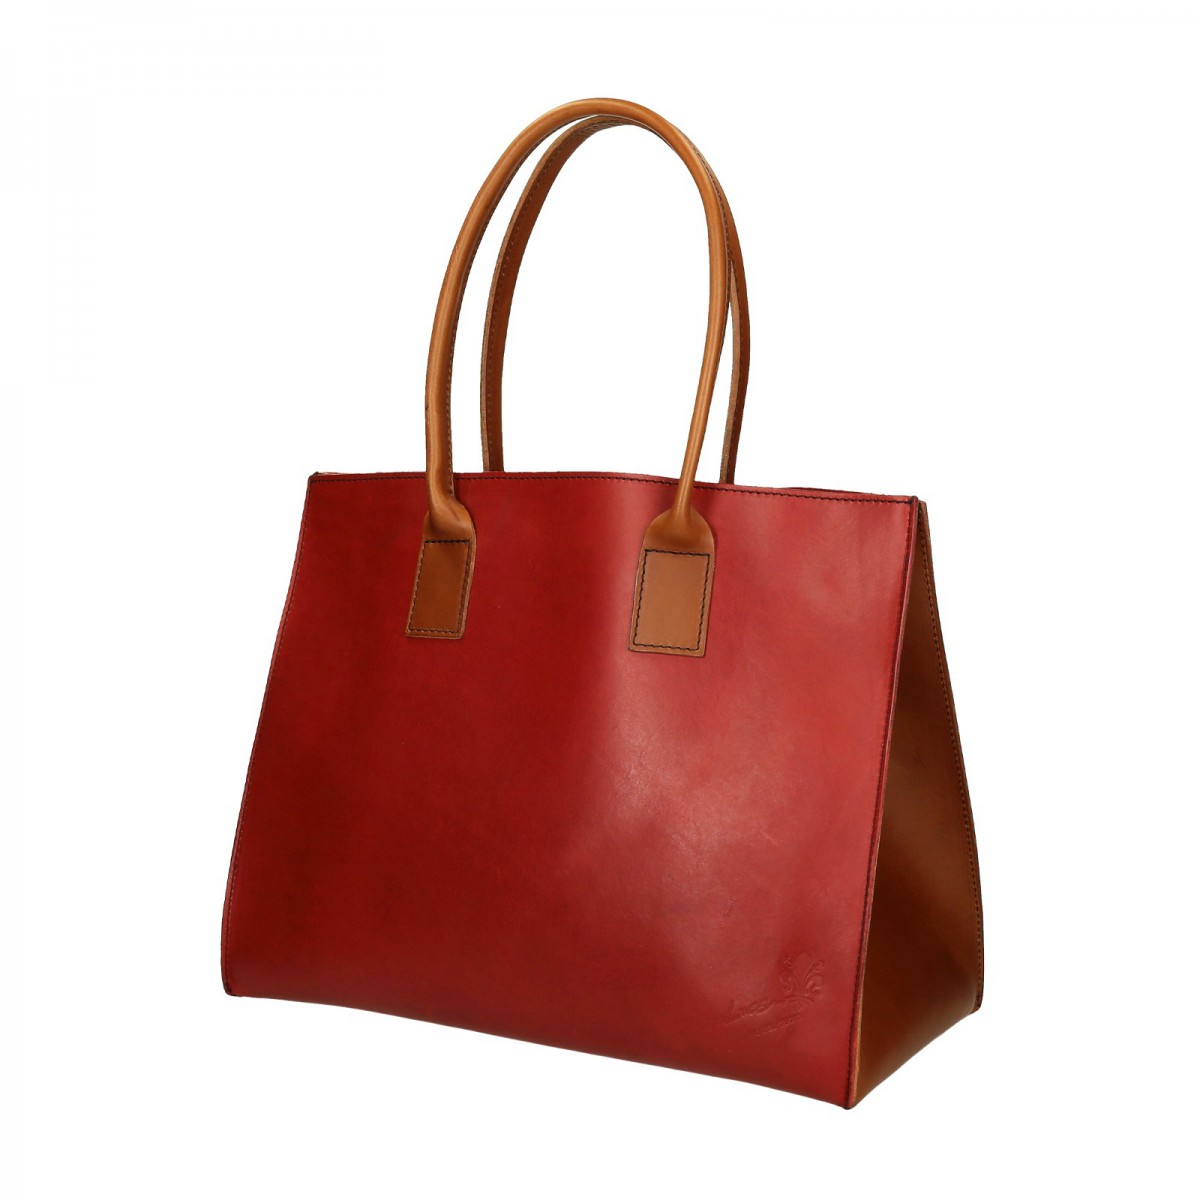 Two tone red tan leather tote bag for women Handmade | Gianluca - The leather craftsman